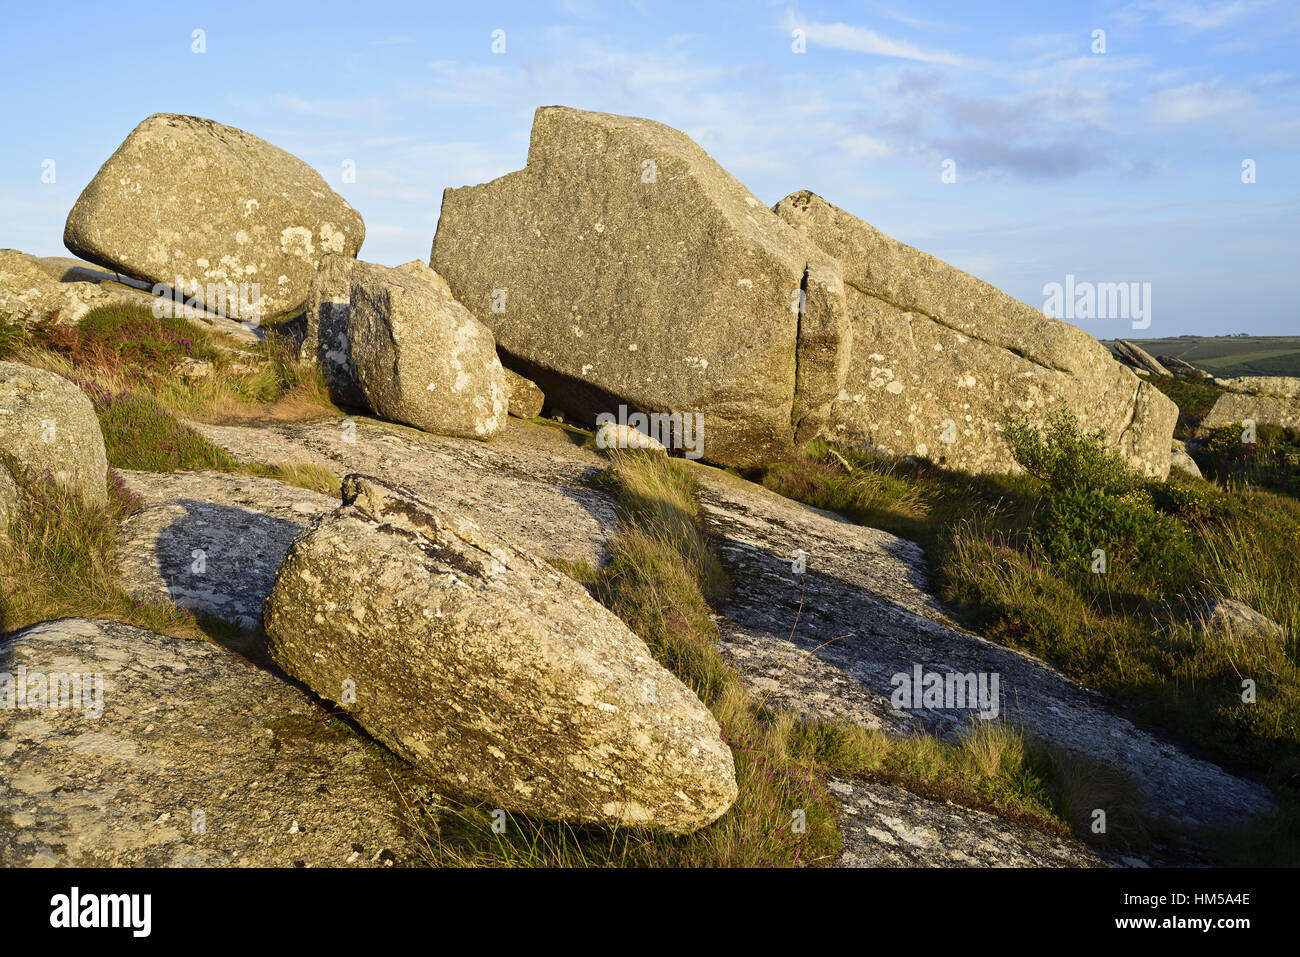 Giant granite blocks forming tors on Amalveor Downs, near Zennor in Penwith, Cornwall. They are near Zennor Quoit and also the south west coast path. Stock Photo